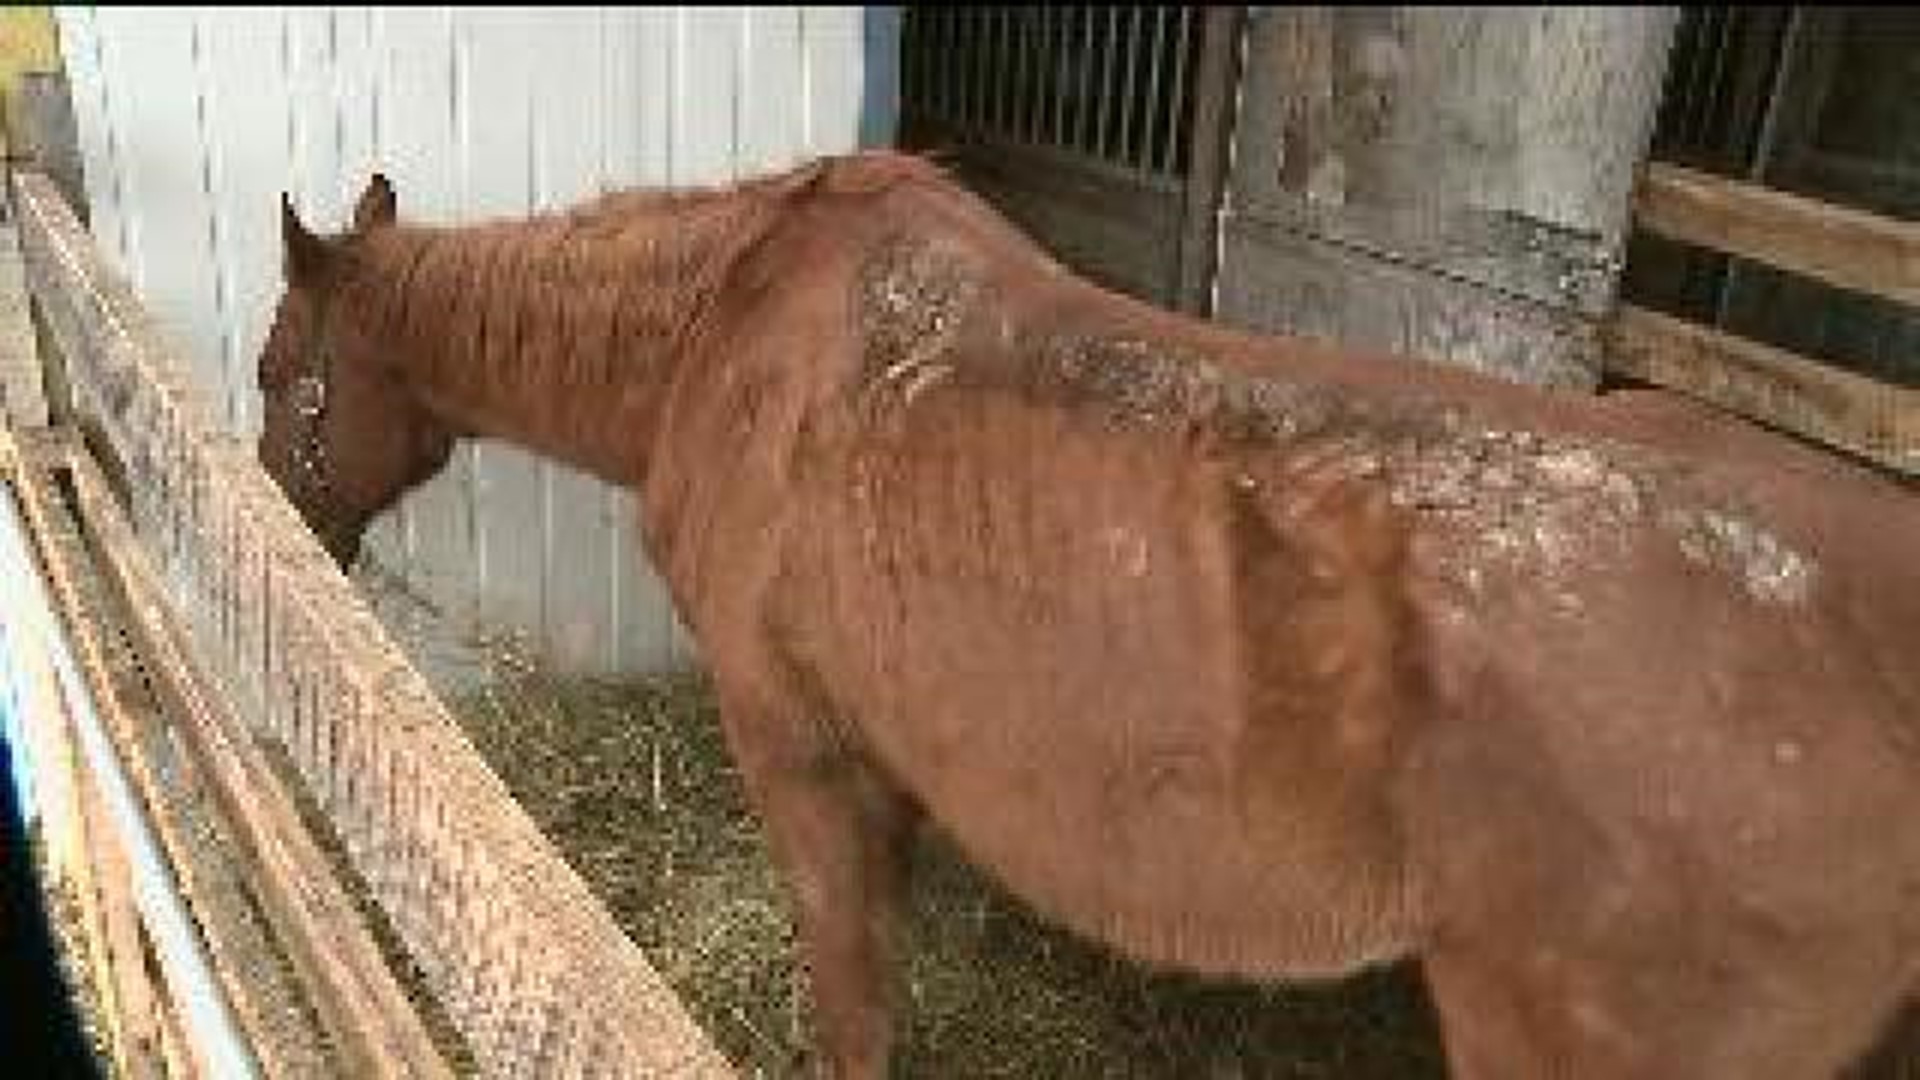 Horses Seized by Humane Officers for Suspected Neglect